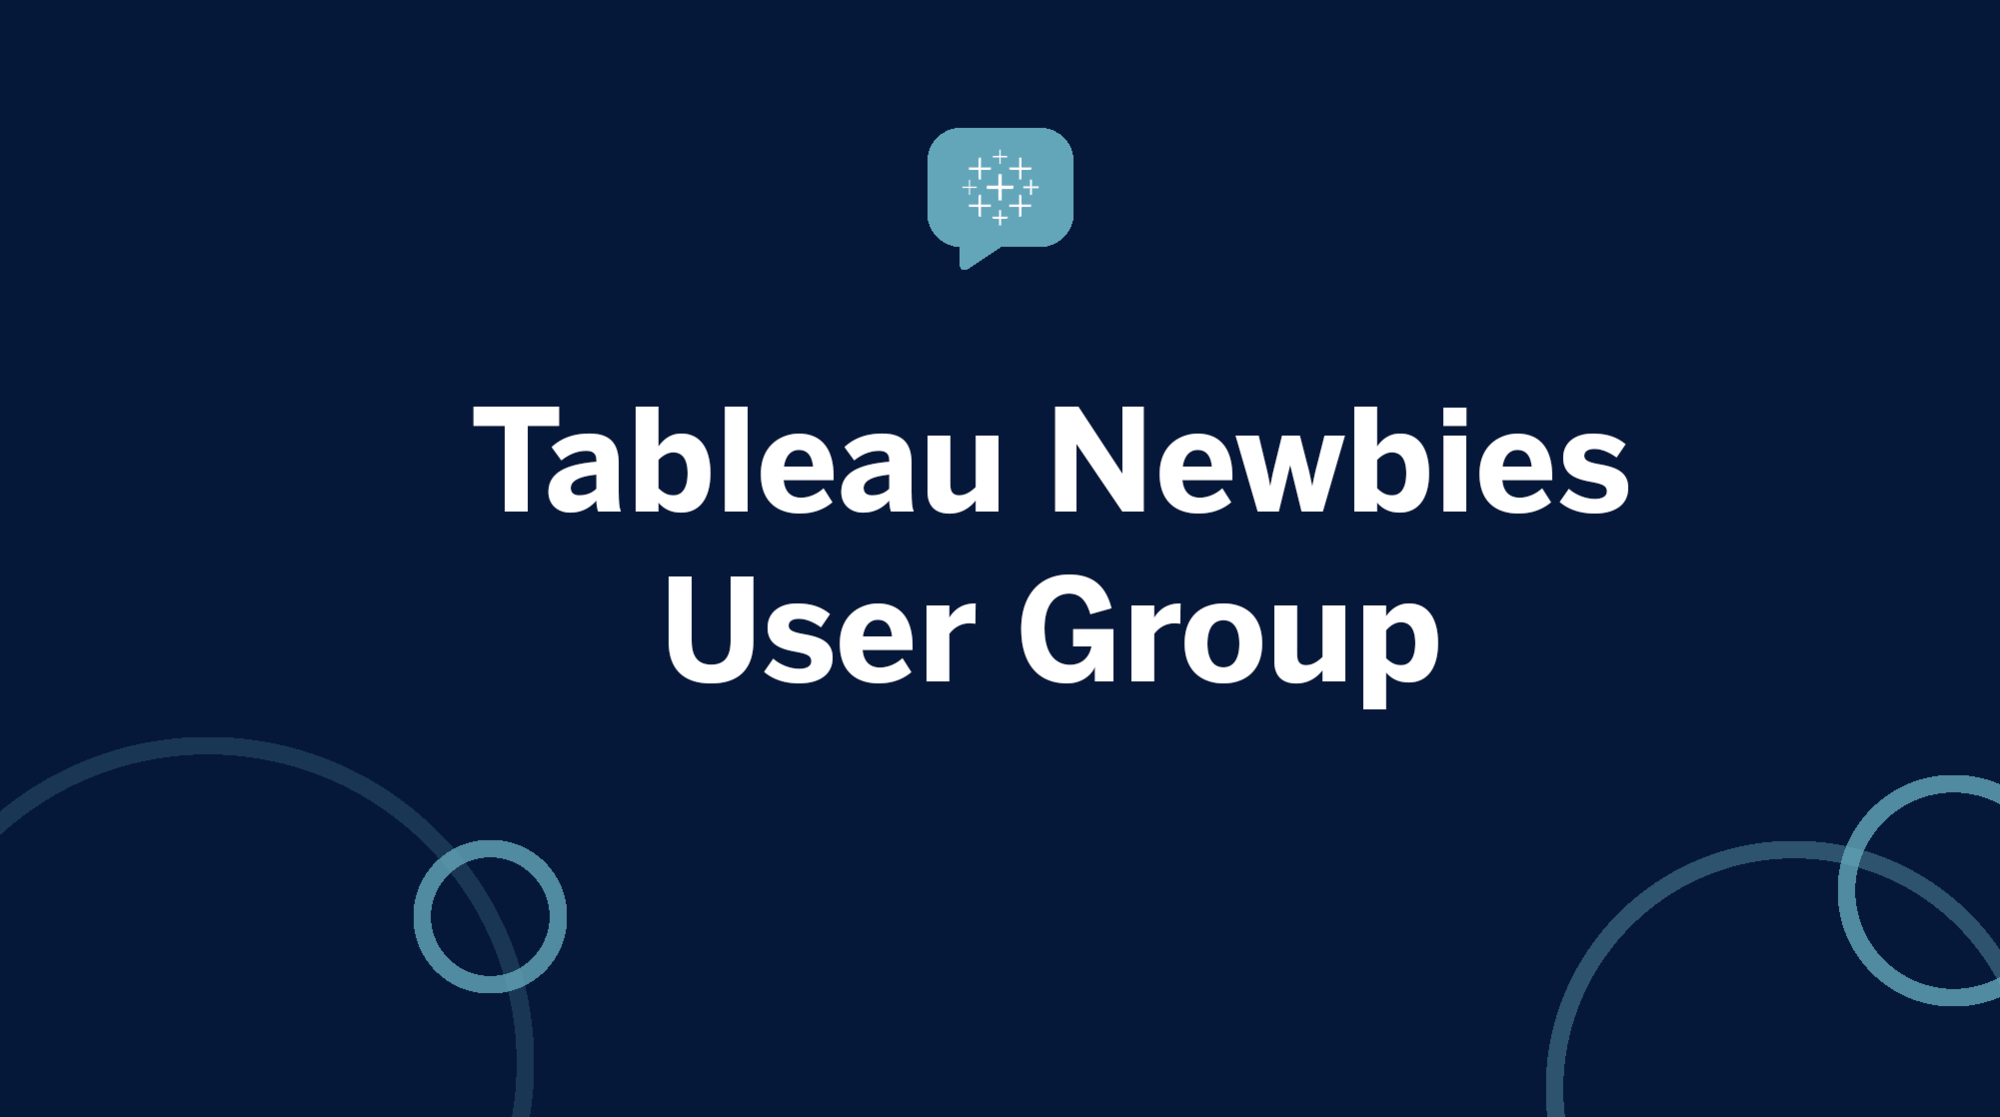 Opens a new window to the event page for Tableau Server Admins User Group